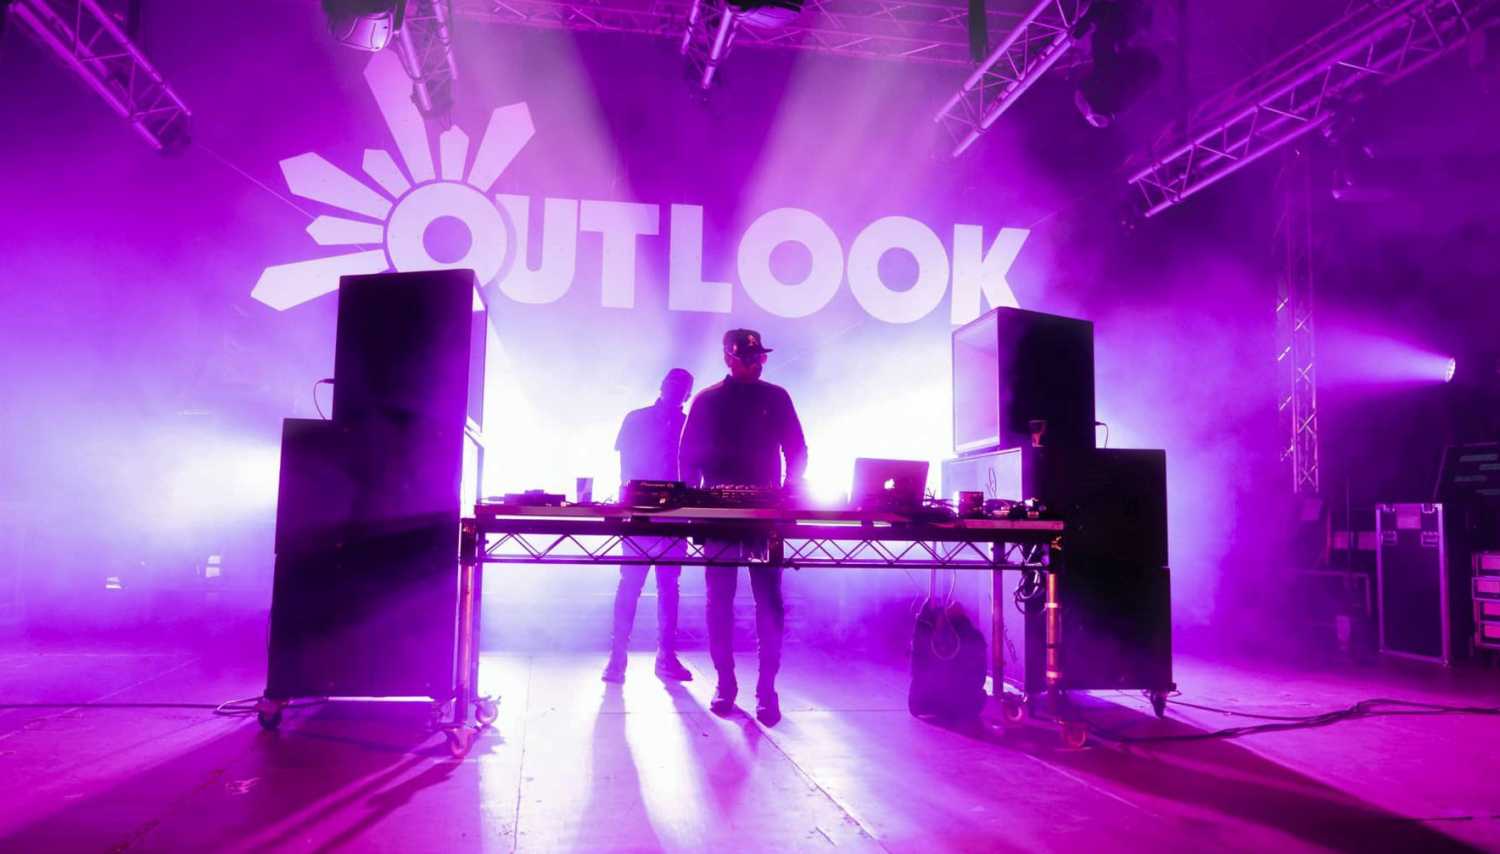 Outlook was staged in the UK for the first time